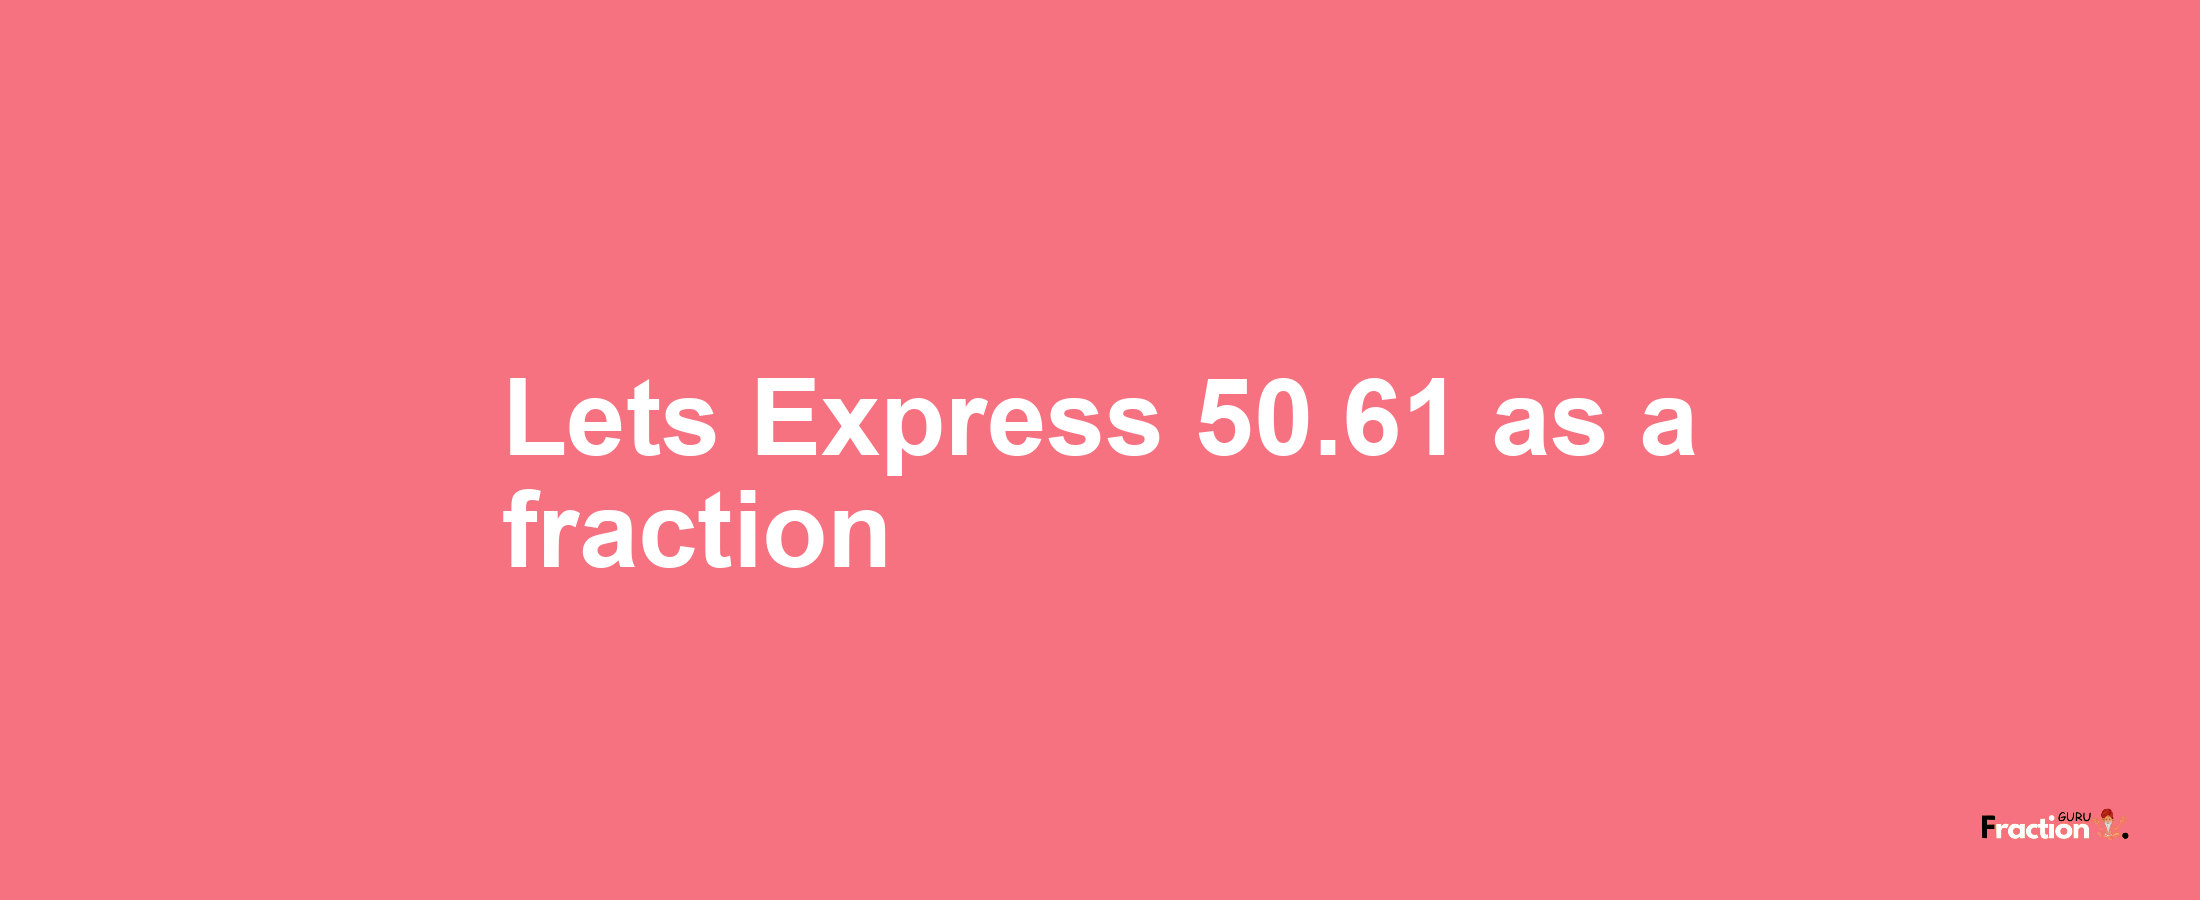 Lets Express 50.61 as afraction